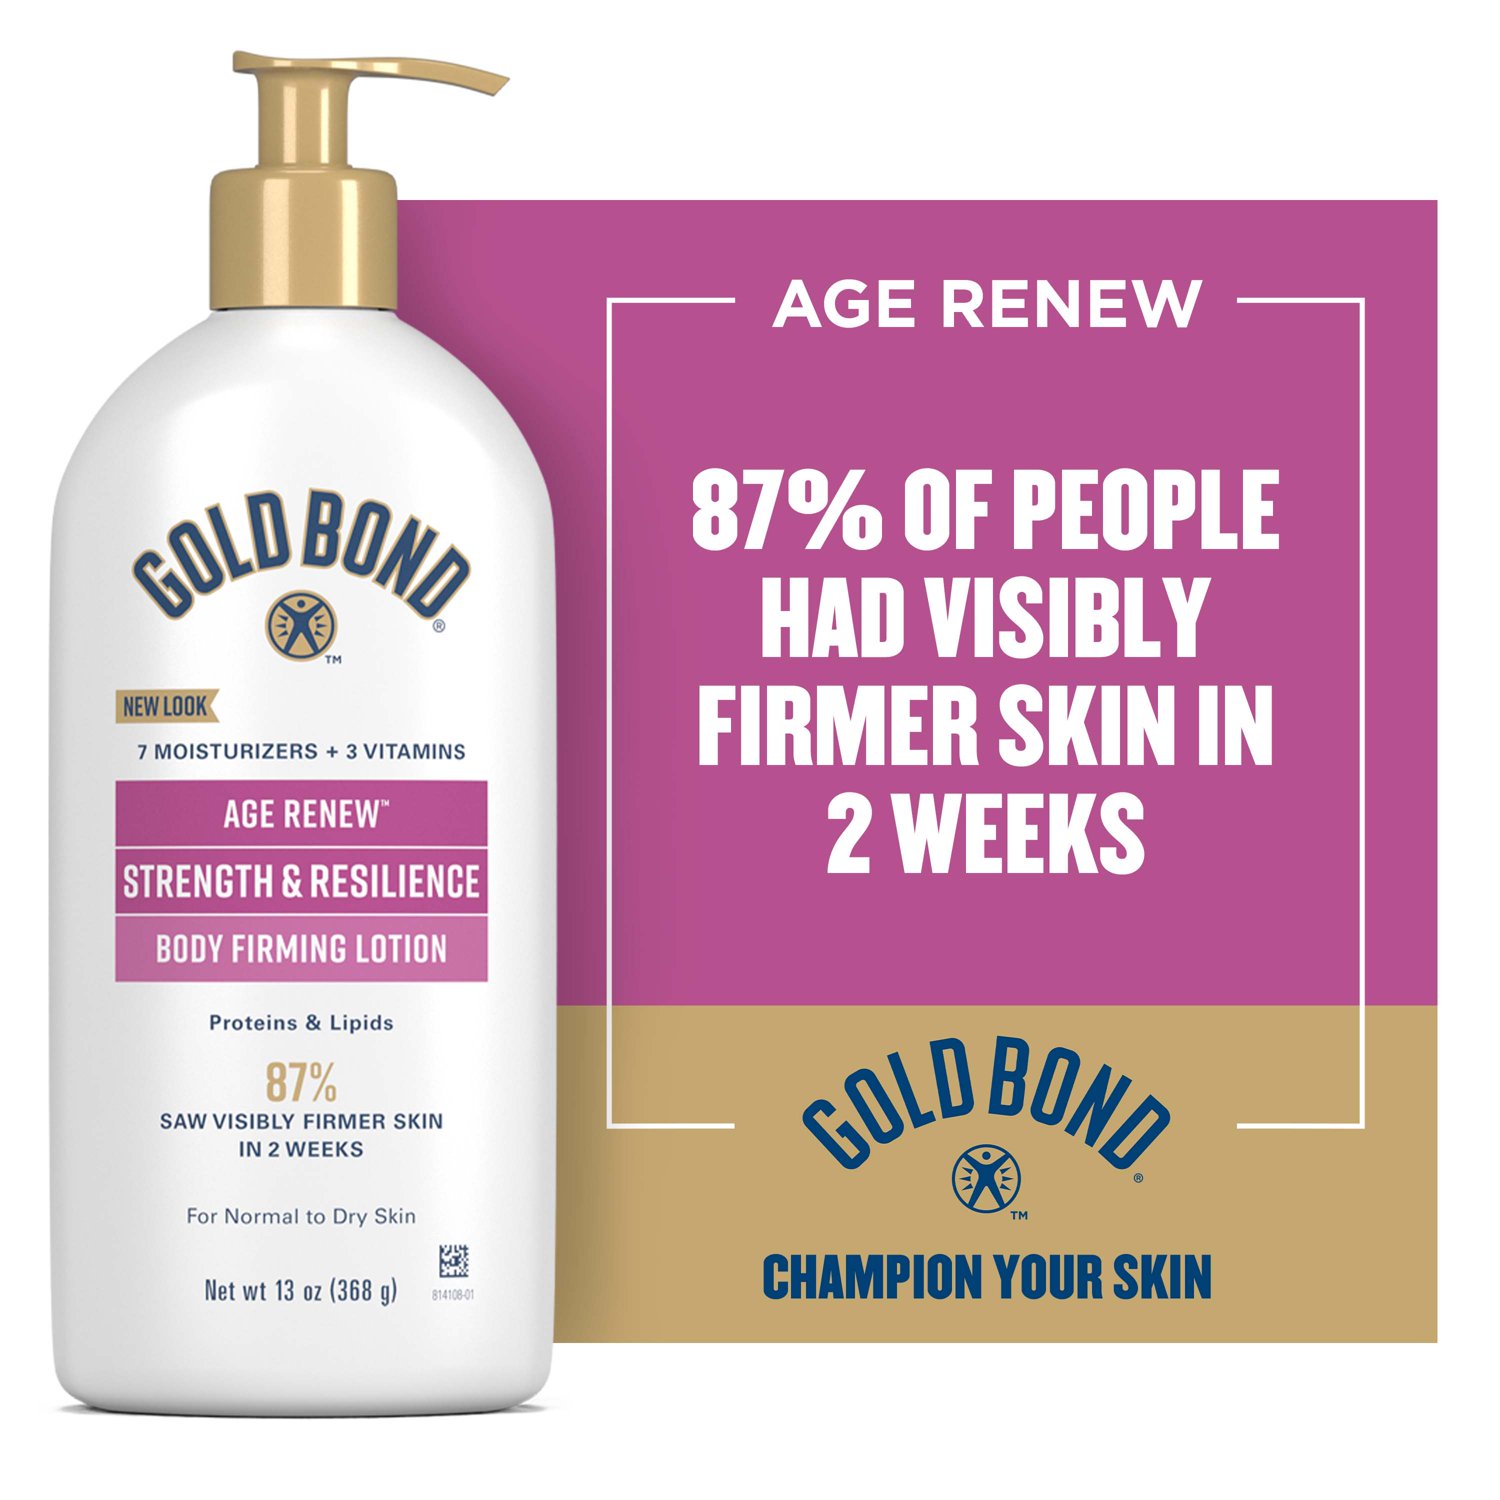 Gold Bond Age Renew Strength and Resilience Hand Moisturizer and Body Lotion Cream for Firmer Skin, 13 oz - image 1 of 8